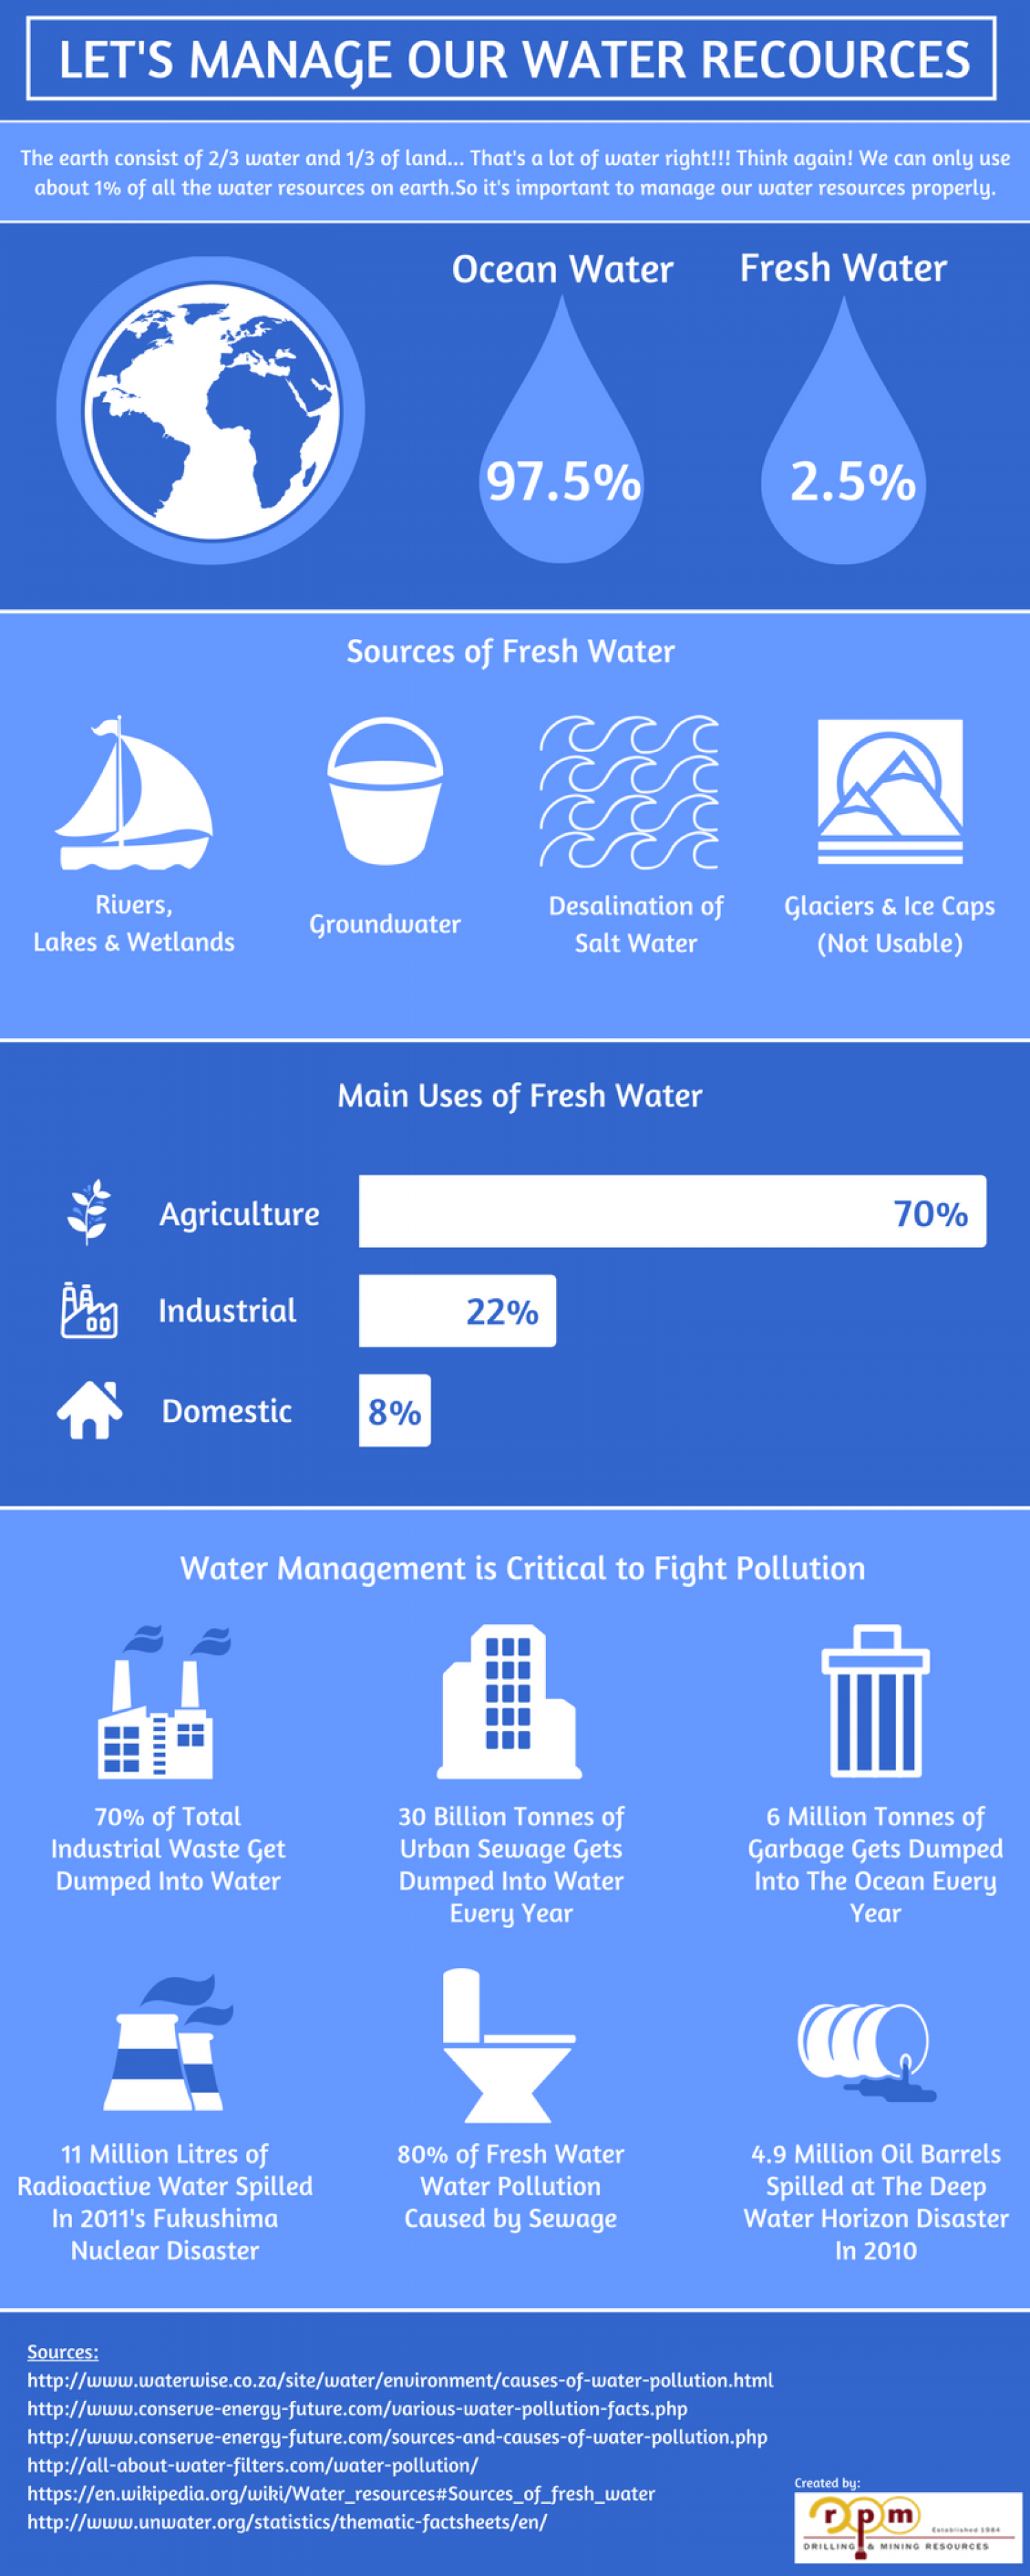 Let's Manage Our Water Resources Infographic